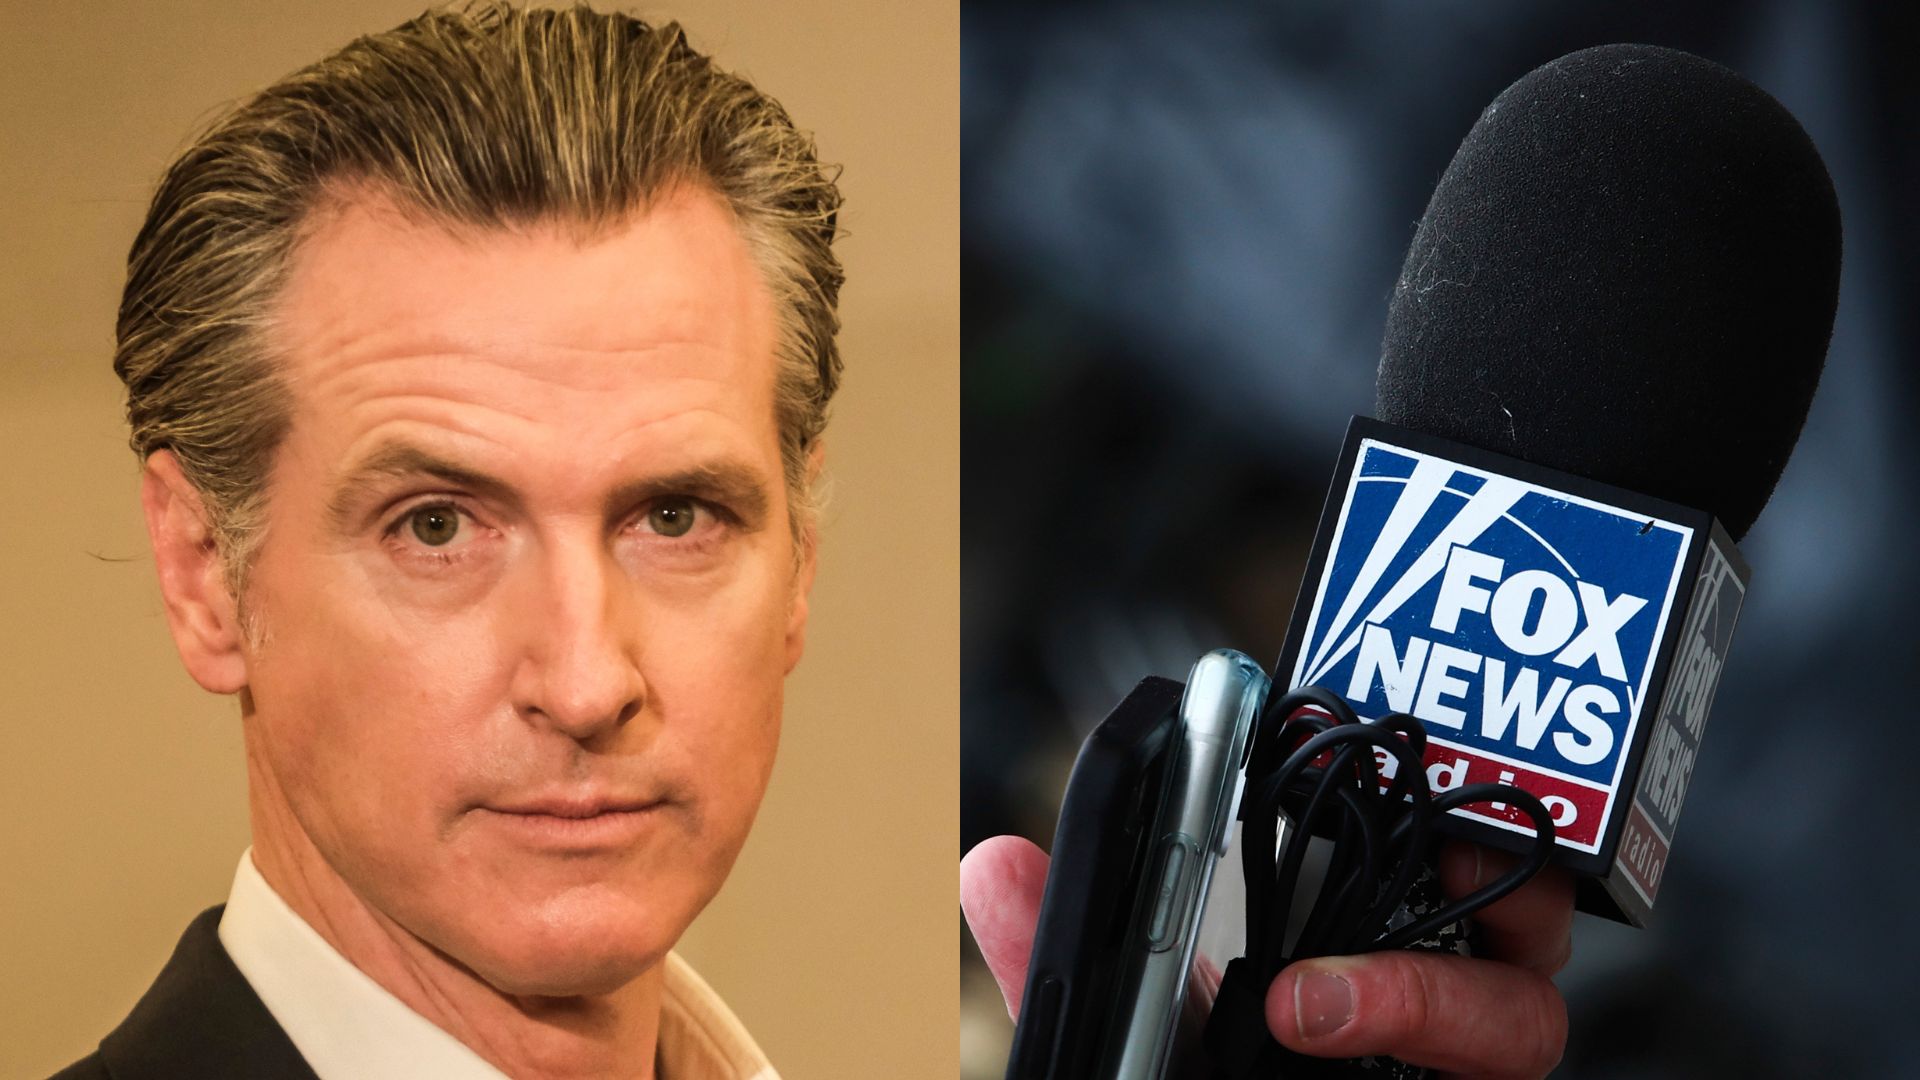 Gavin Newsom Calls Fox News ‘Quite Literally Bullsh*t and Misinformation’ — But Reportedly Watches Network Religiously